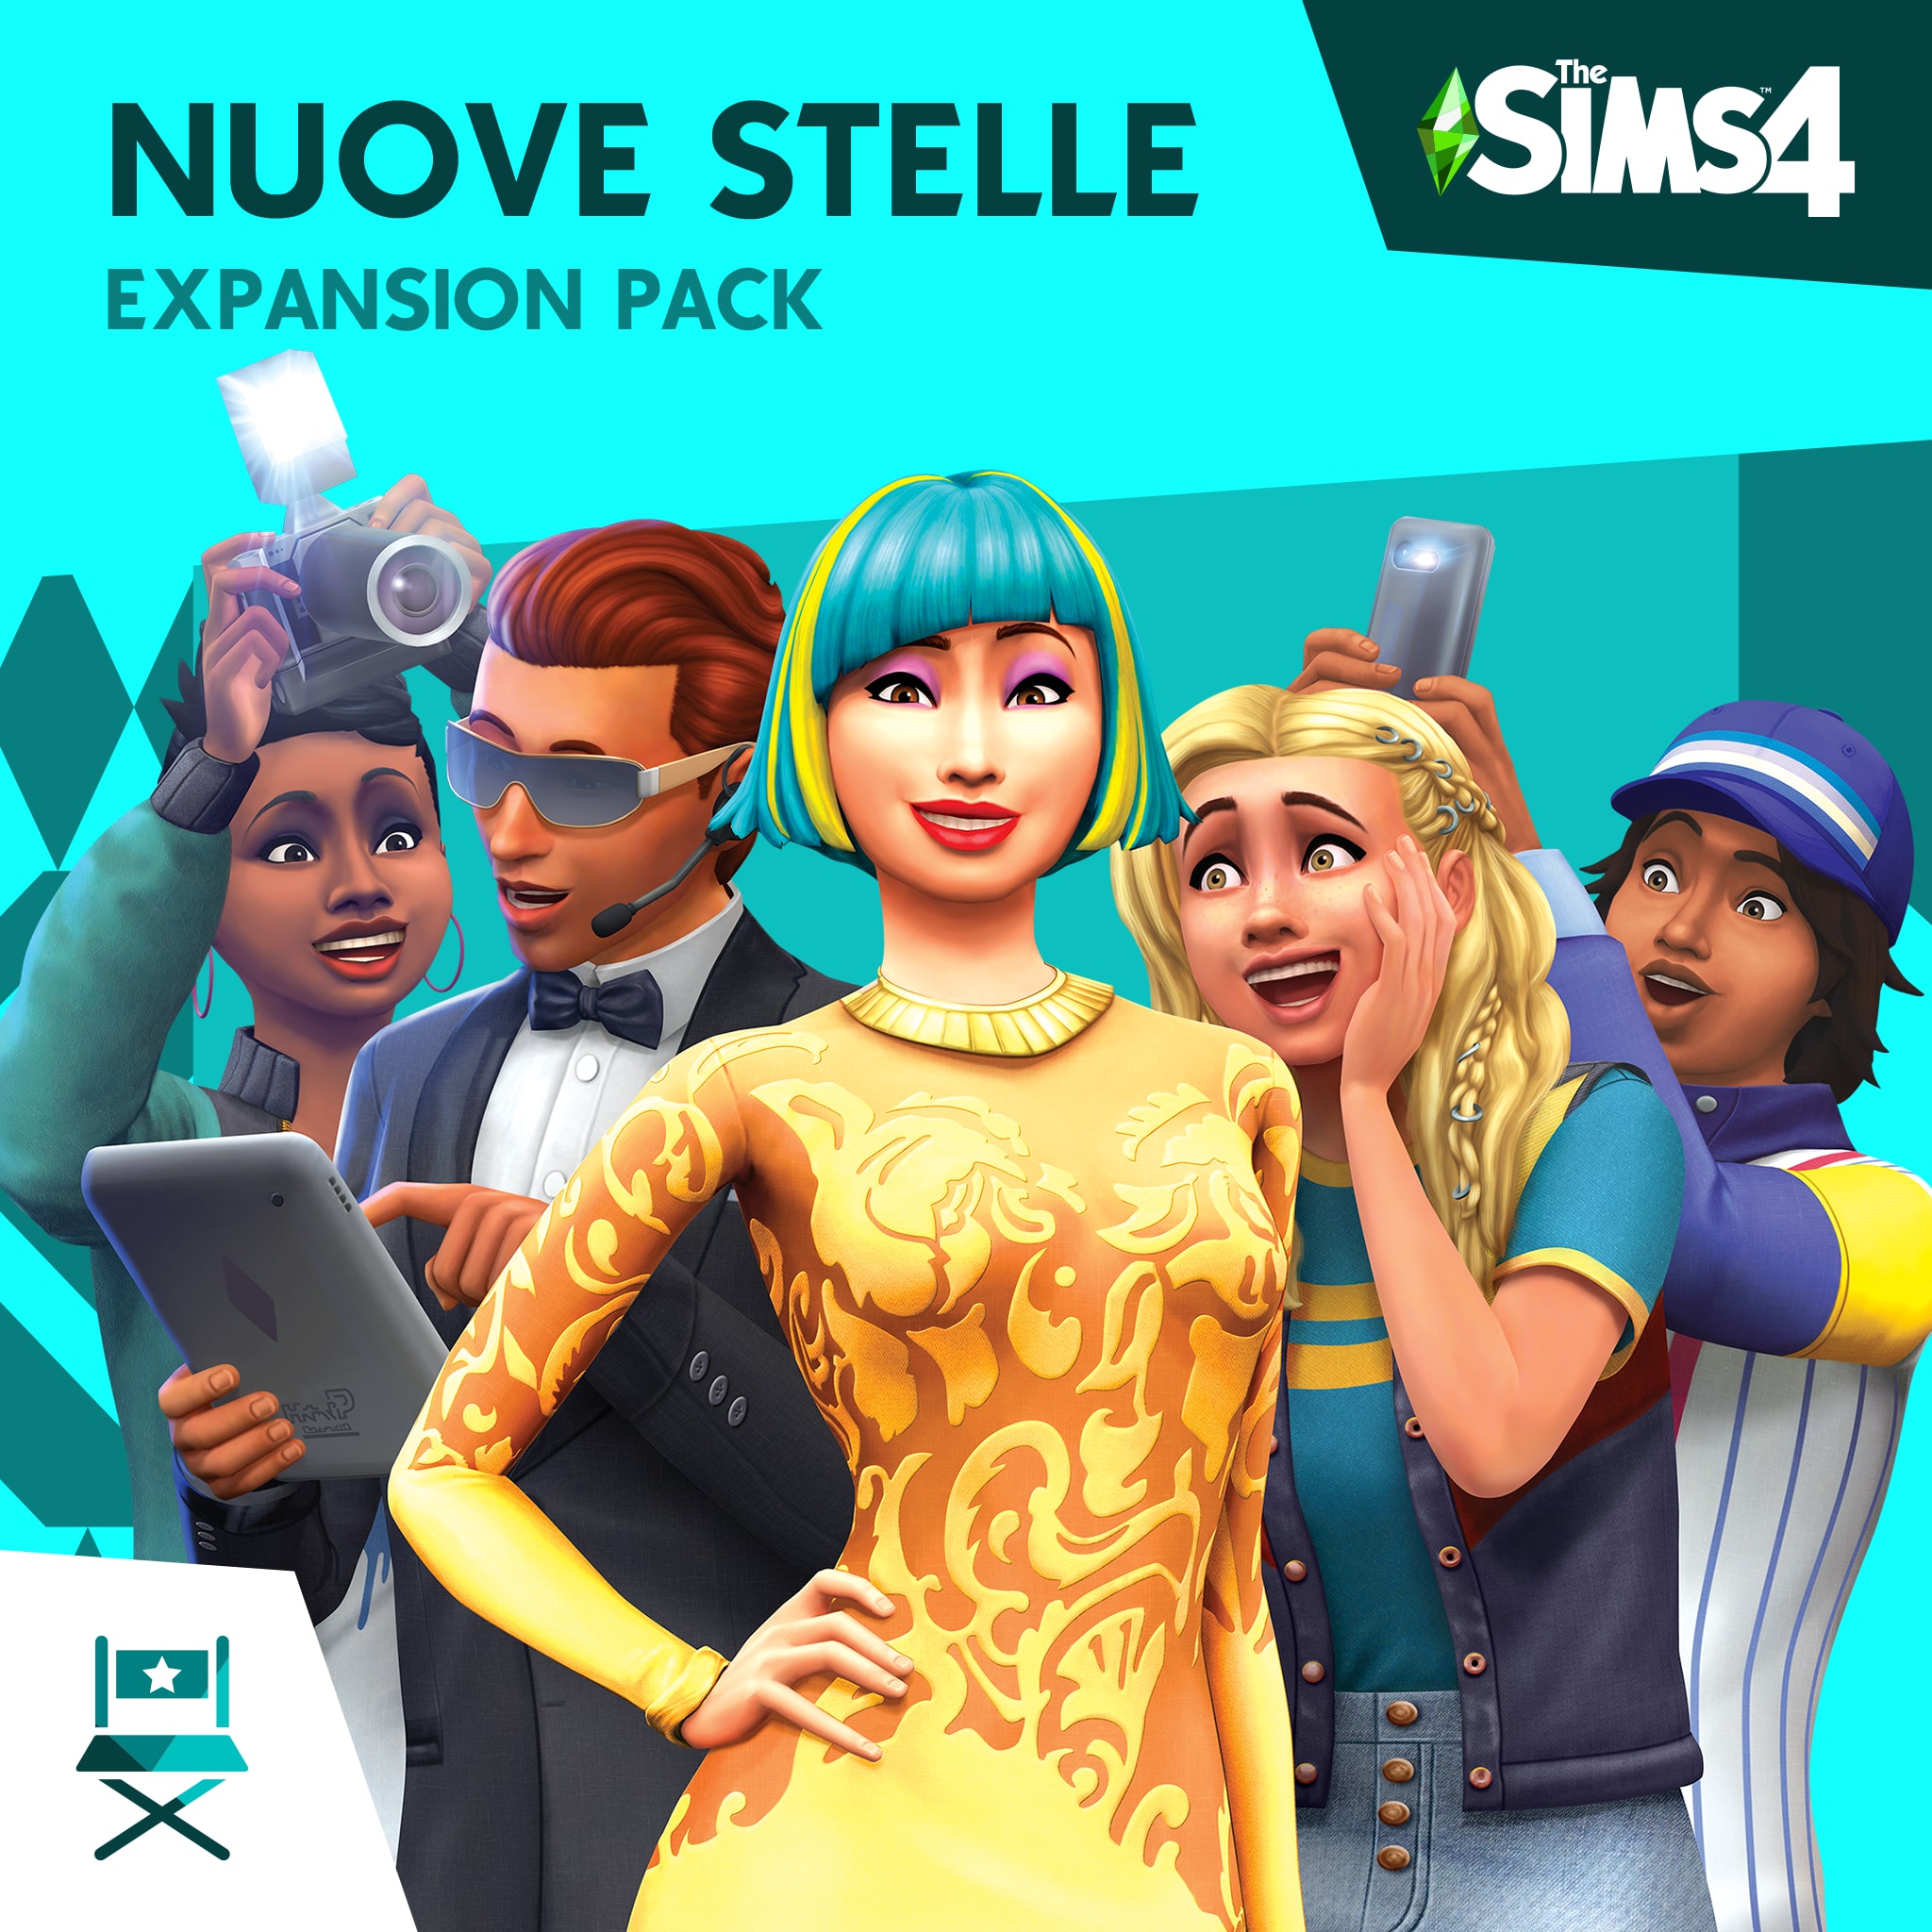 The Sims™ 4 Nuove Stelle